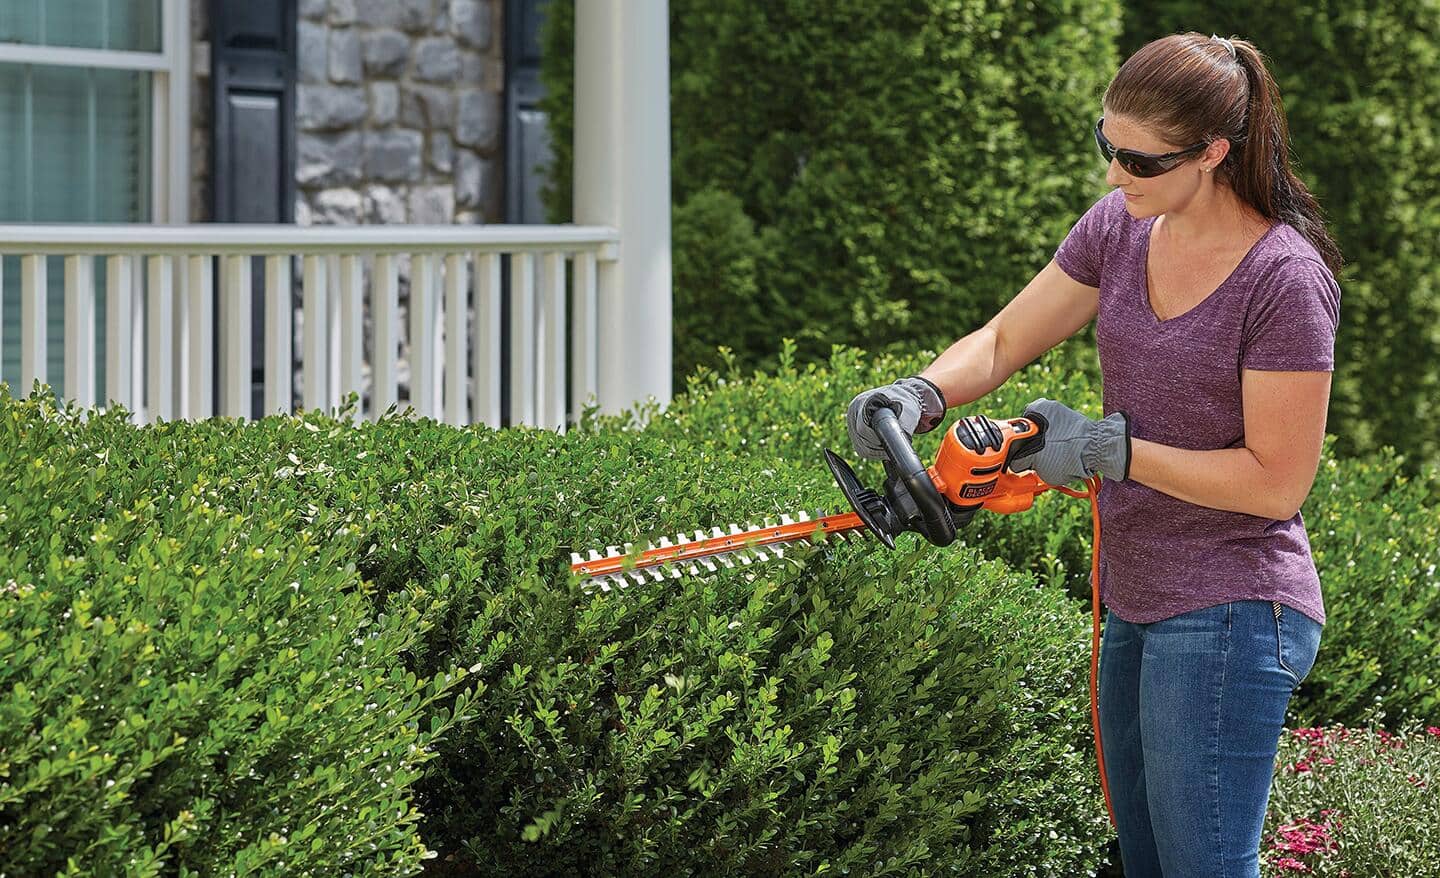 Must-Have Outdoor Power Tools - The Home Depot